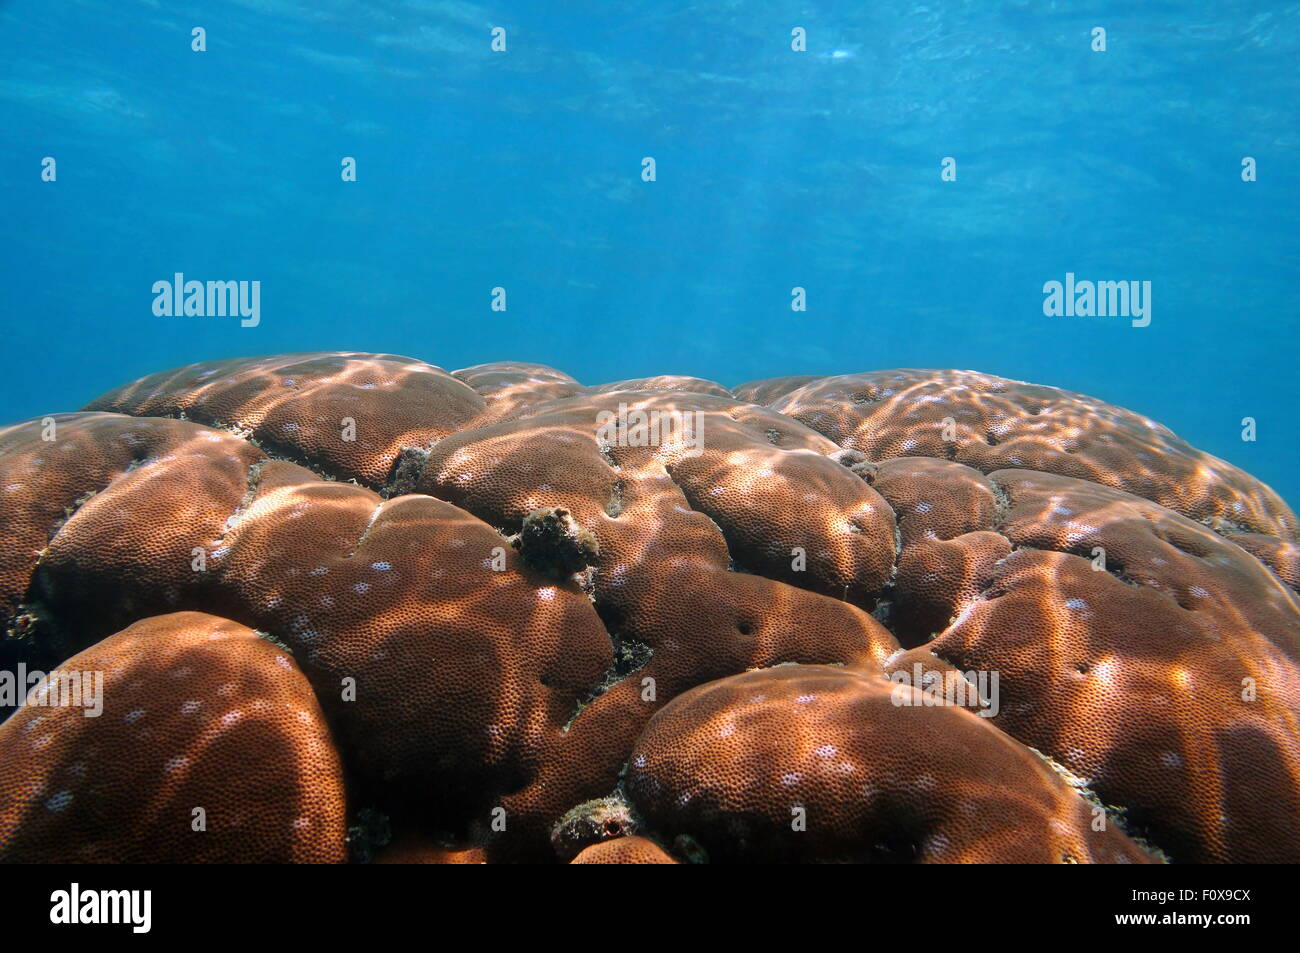 Massive starlet coral underwater with blue water, Caribbean sea, natural scene Stock Photo